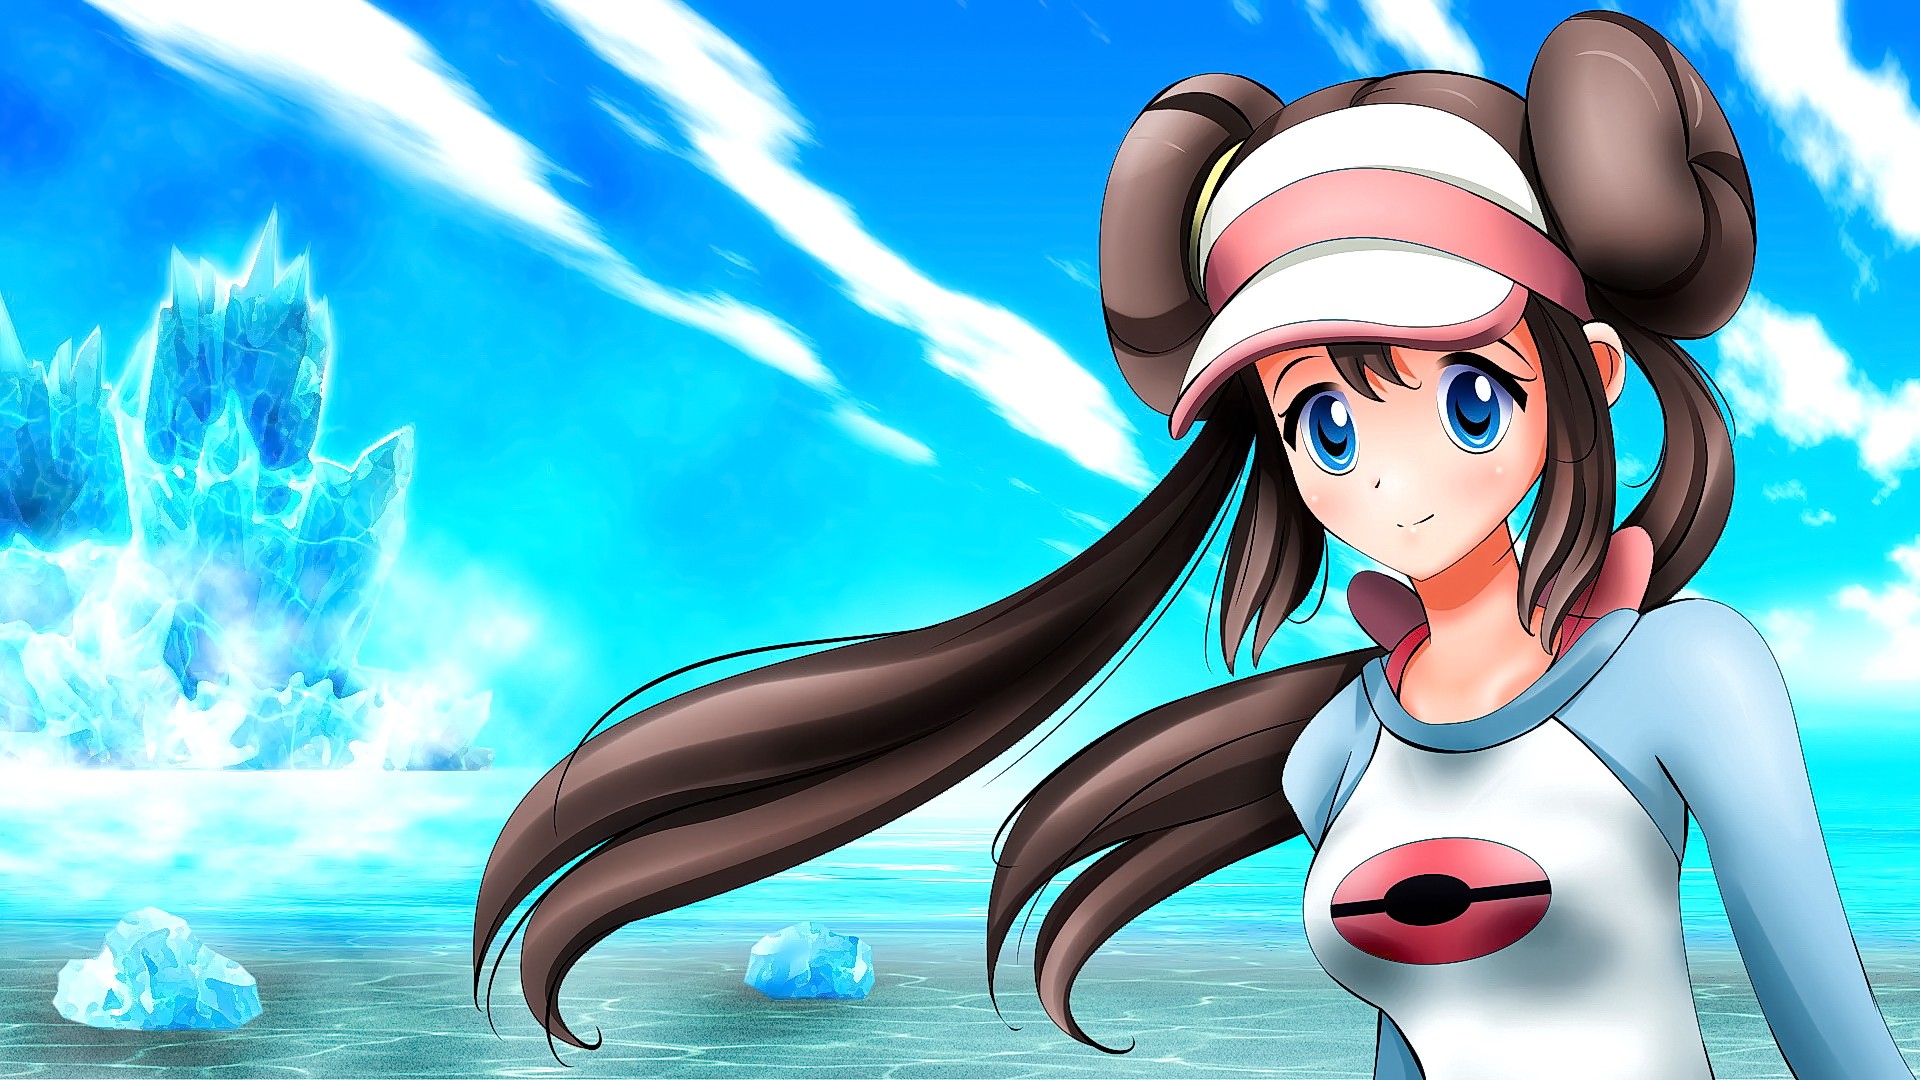 Anime Anime Girls Long Hair Brunette Blue Eyes Sky Clouds Smiling Looking At Viewer Pokemon Trainers 1920x1080